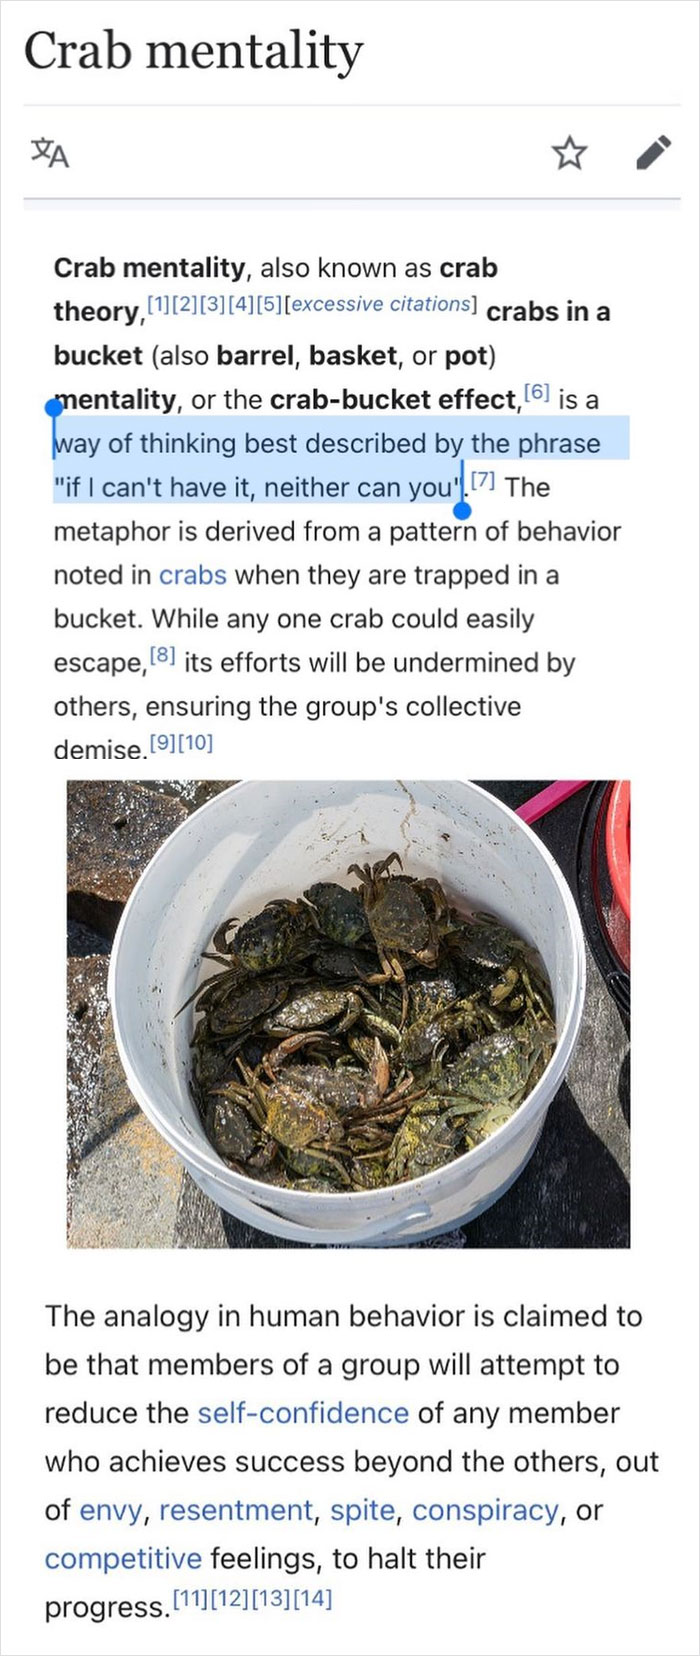 Just Like Crabs In A Bucket Block The Escape Attempts Of Other Crabs, People In A Group May Attempt To Sabotage The The Most Talented Group Member Out Of Envy And Spite